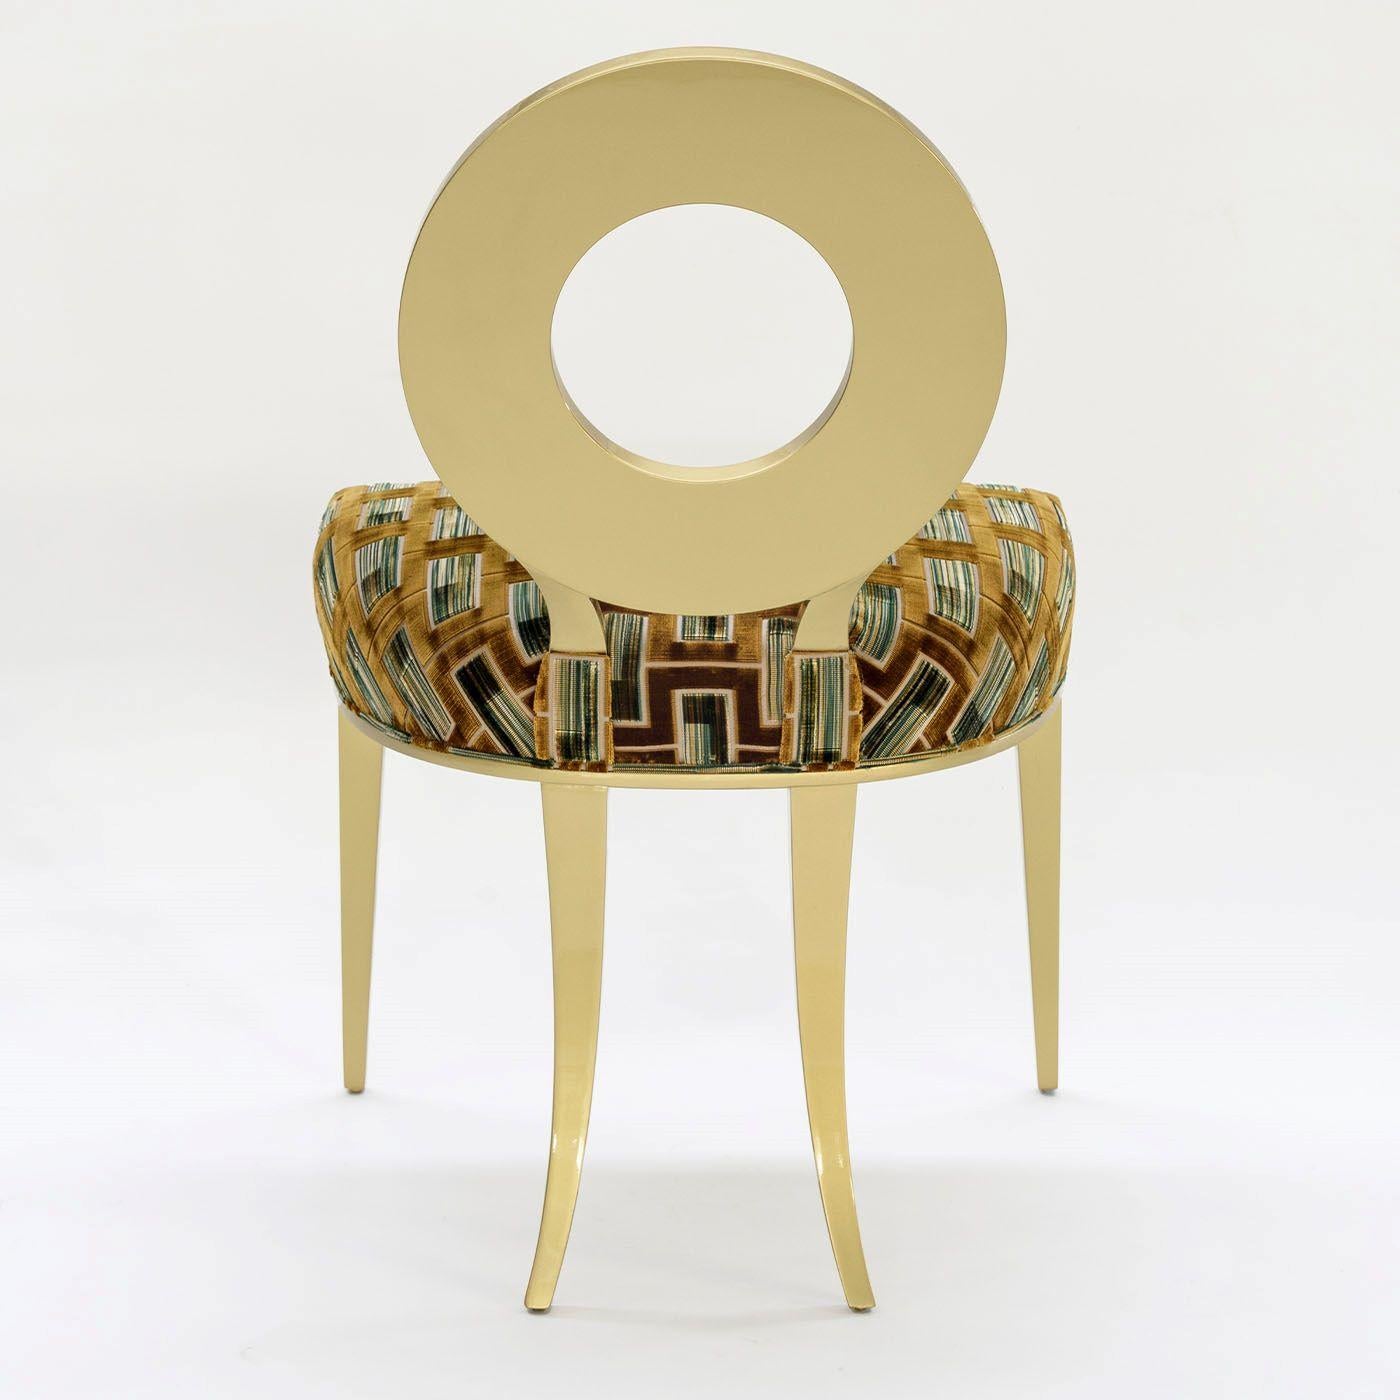 A ring-shaped backrest recalling a full moon characterizes this stylish and graceful chair. Lacquered in a shimmering golden tone and enriched with an antiqued glossy finish, the wooden structure combines tapered and slightly curved legs to a